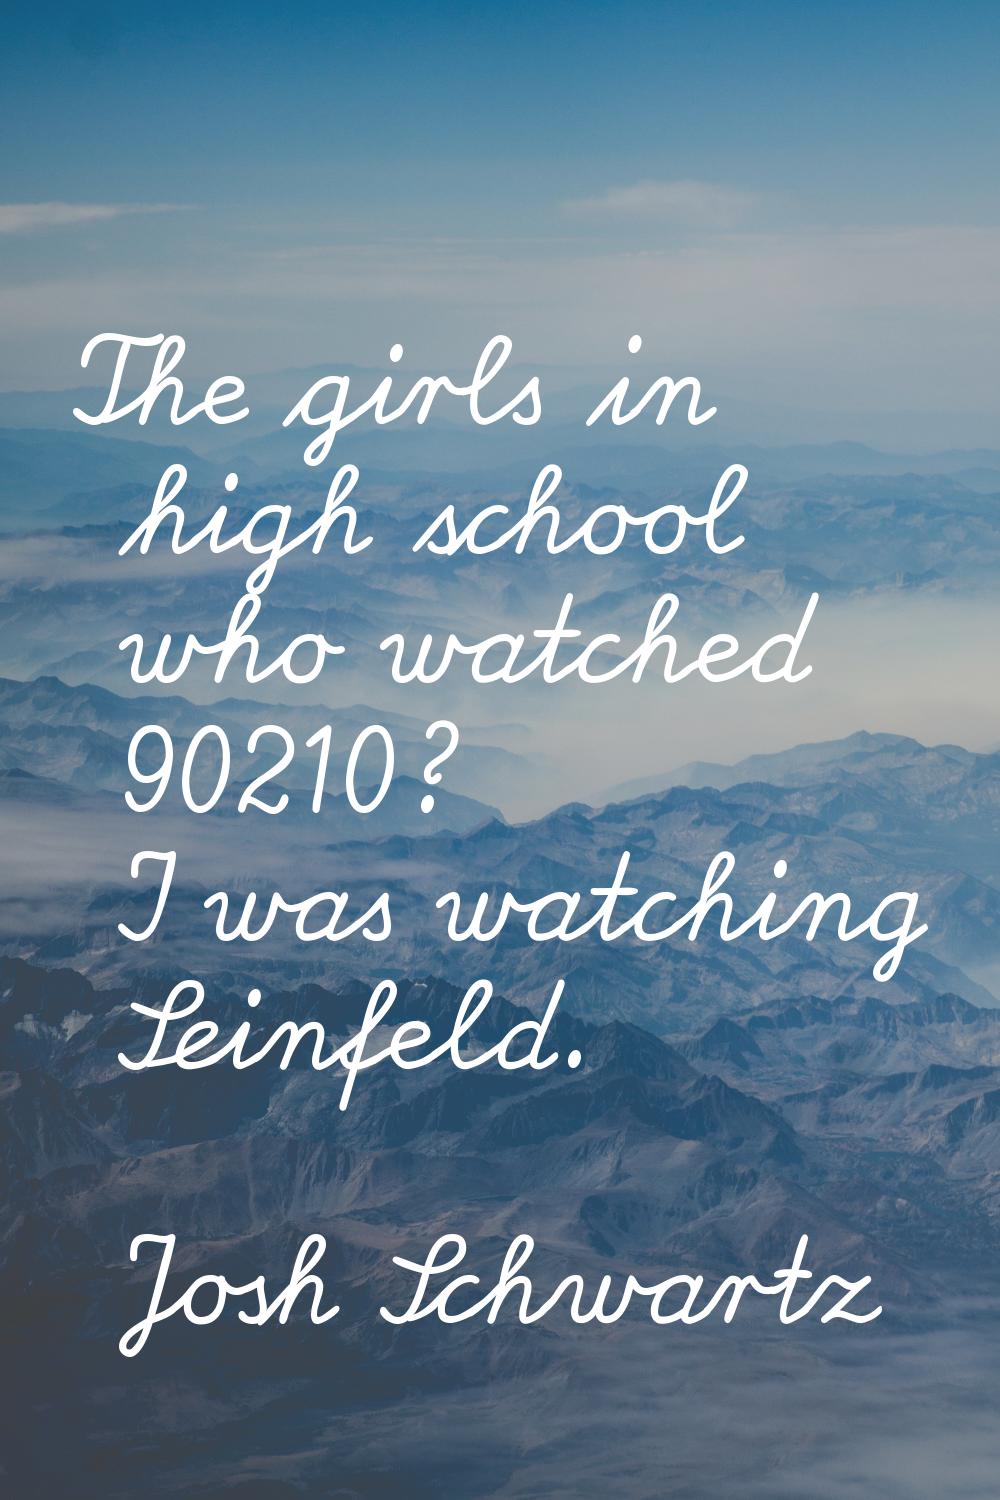 The girls in high school who watched 90210? I was watching Seinfeld.